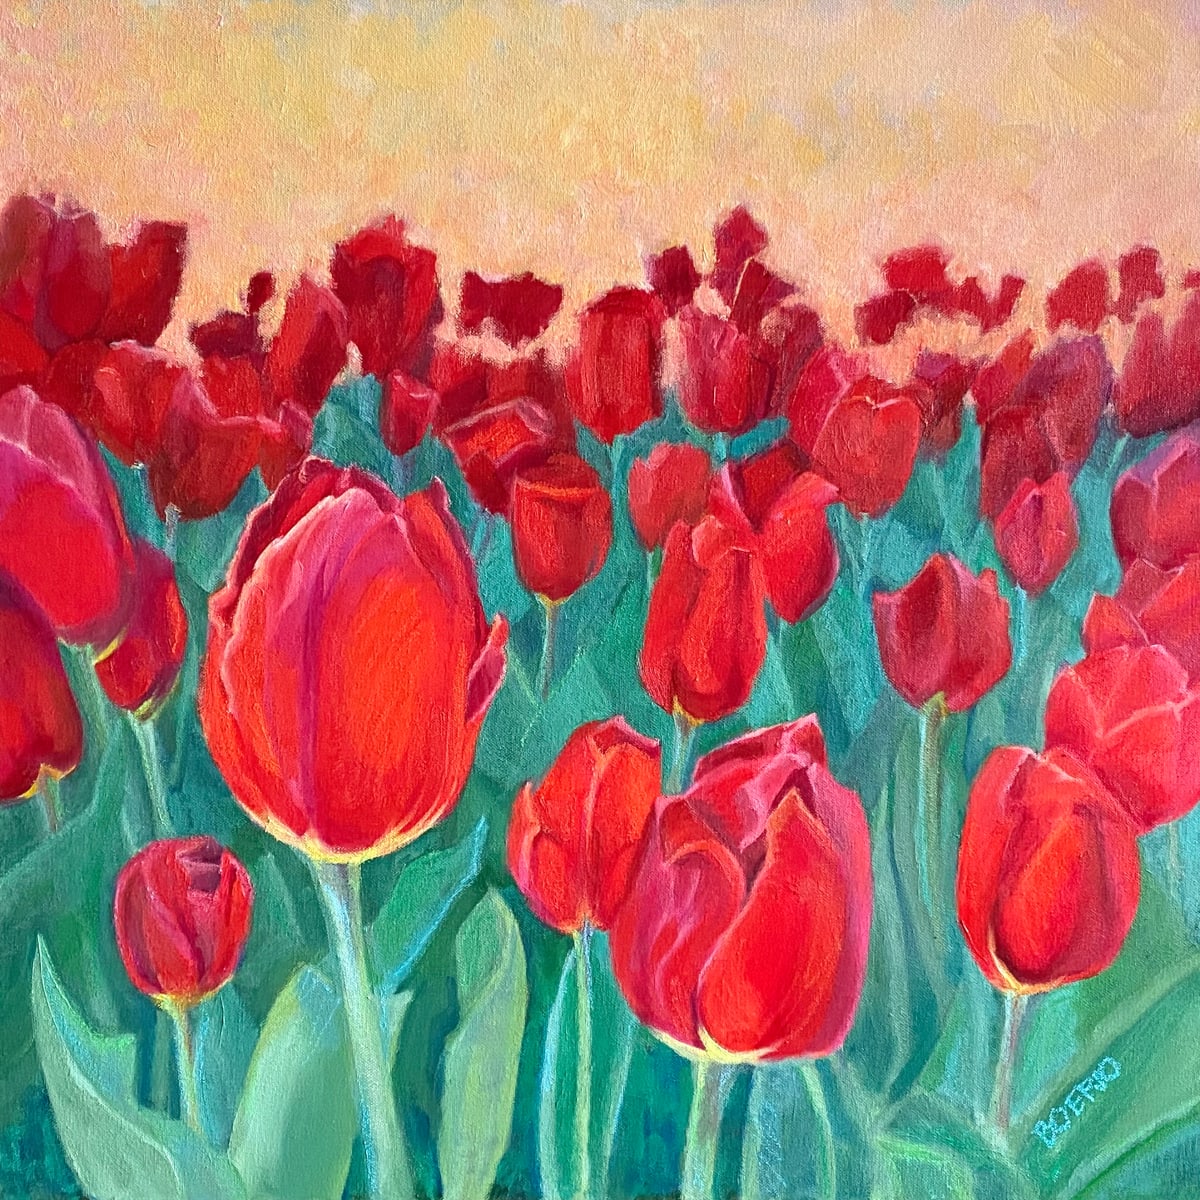 Abundance: Tulips in Red (framed) by Carrie Lacey Boerio  Image: © Carrie Lacey Boerio 